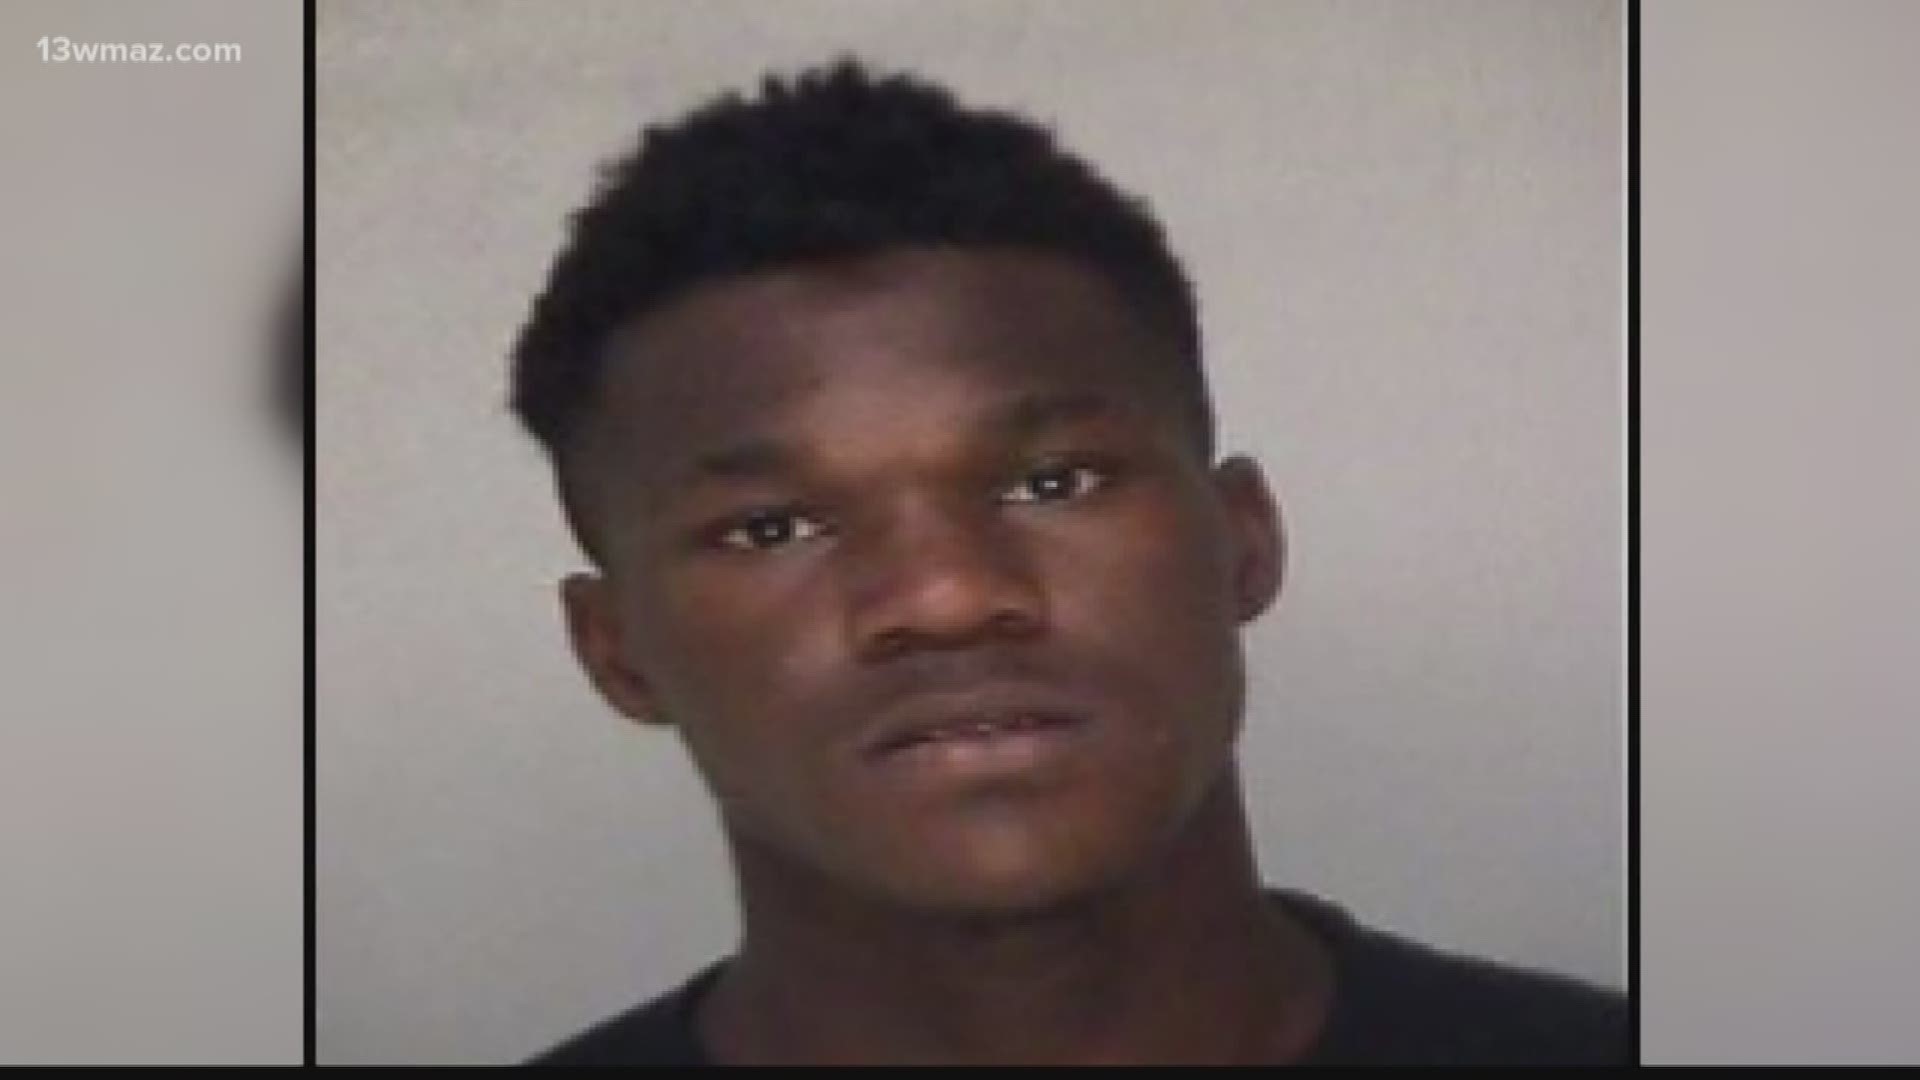 The Bibb County Sheriff’s Office needs your help finding a Macon teen allegedly involved in a carjacking.